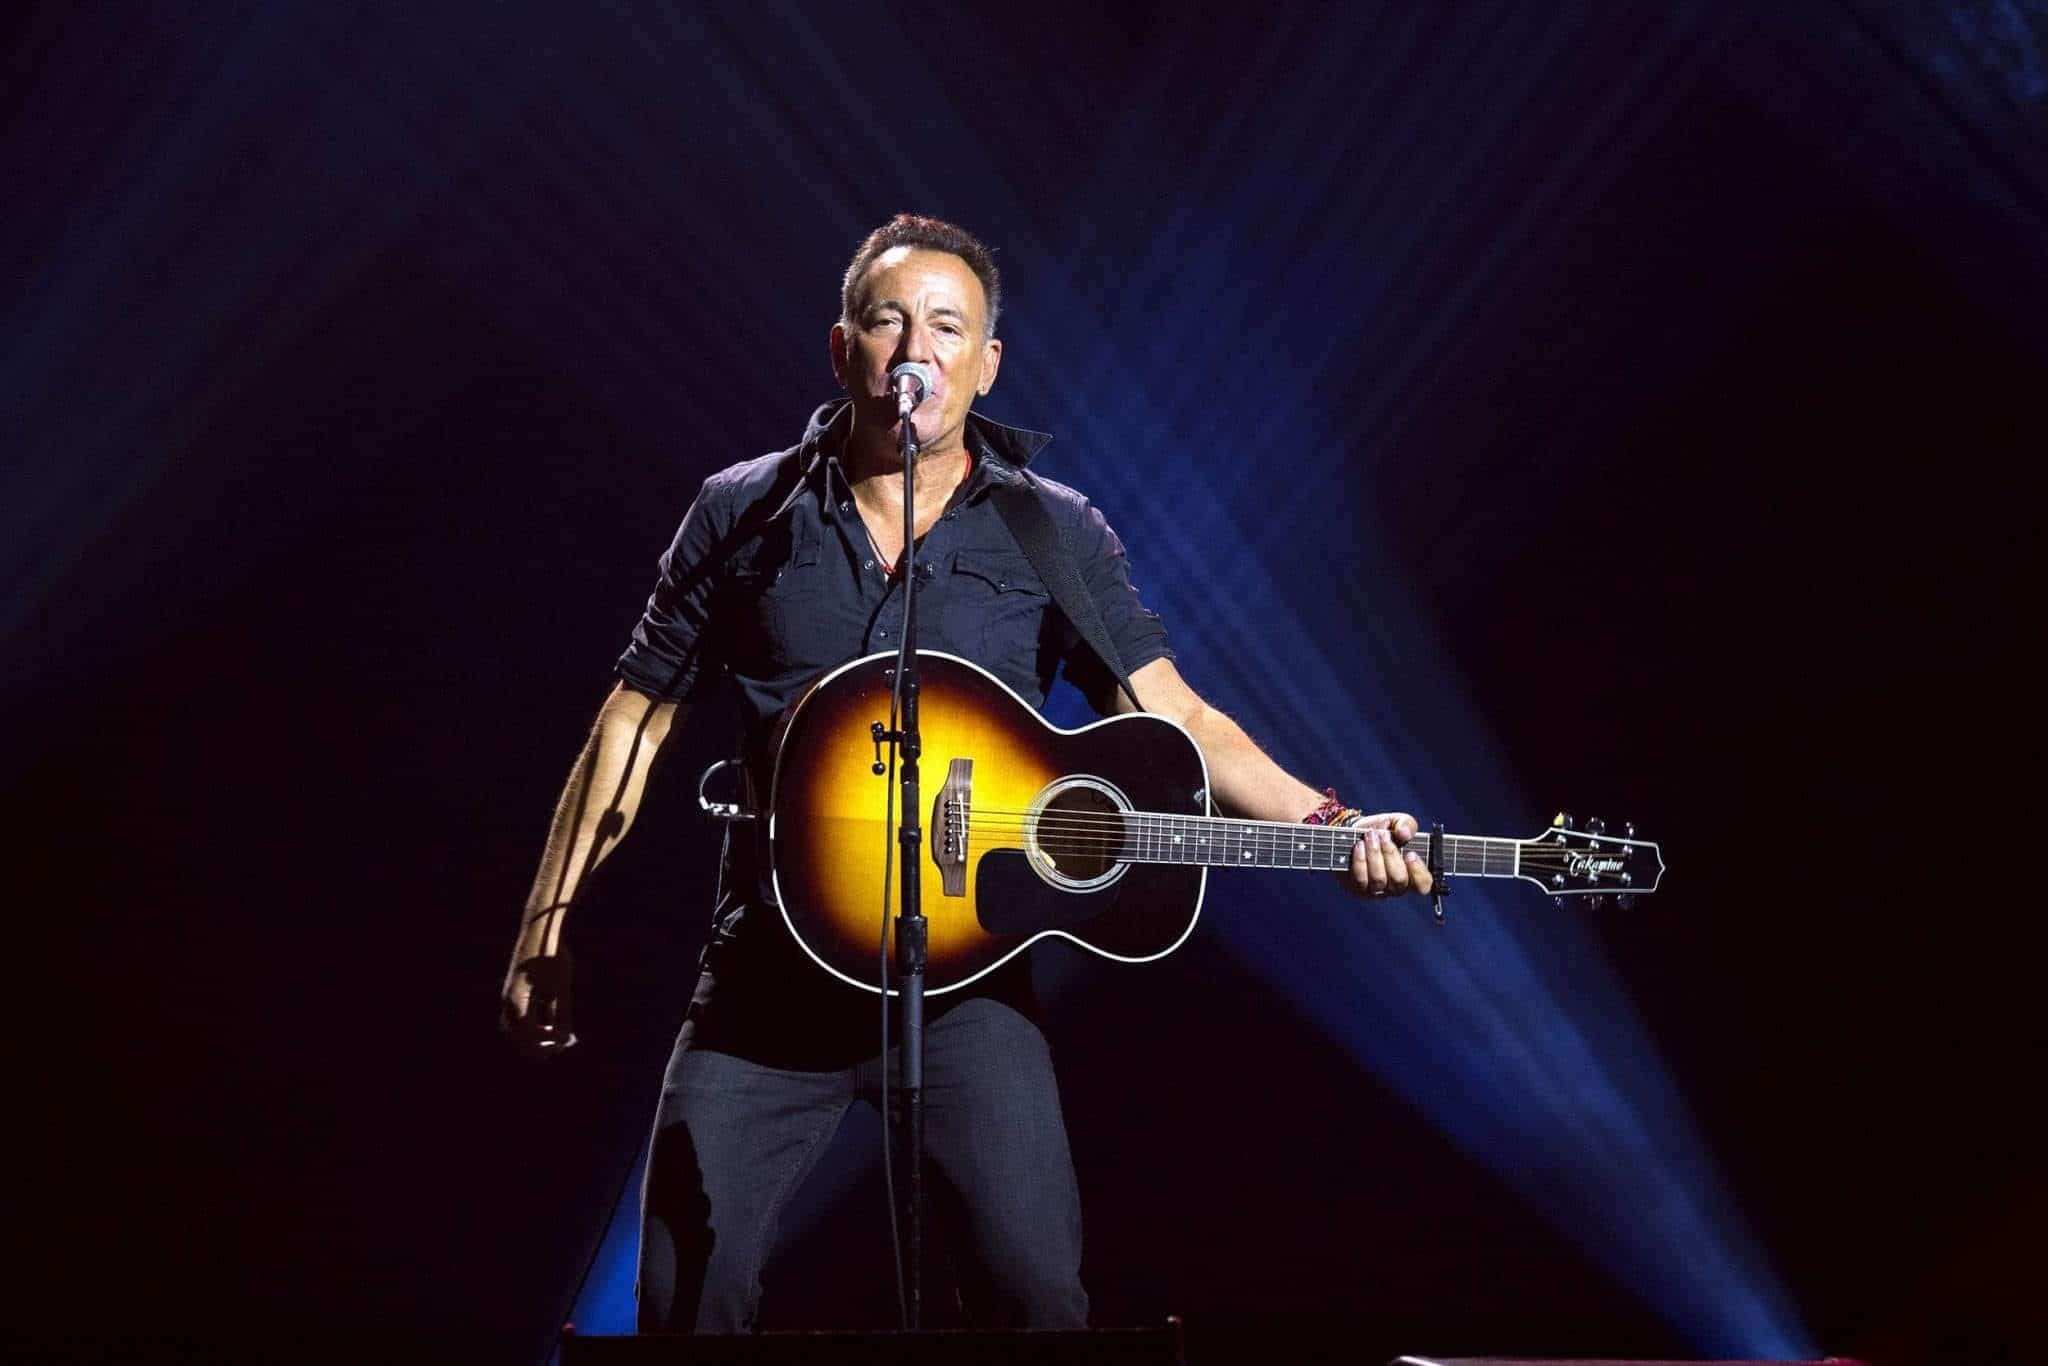 Bruce Springsteen autobiography and much more